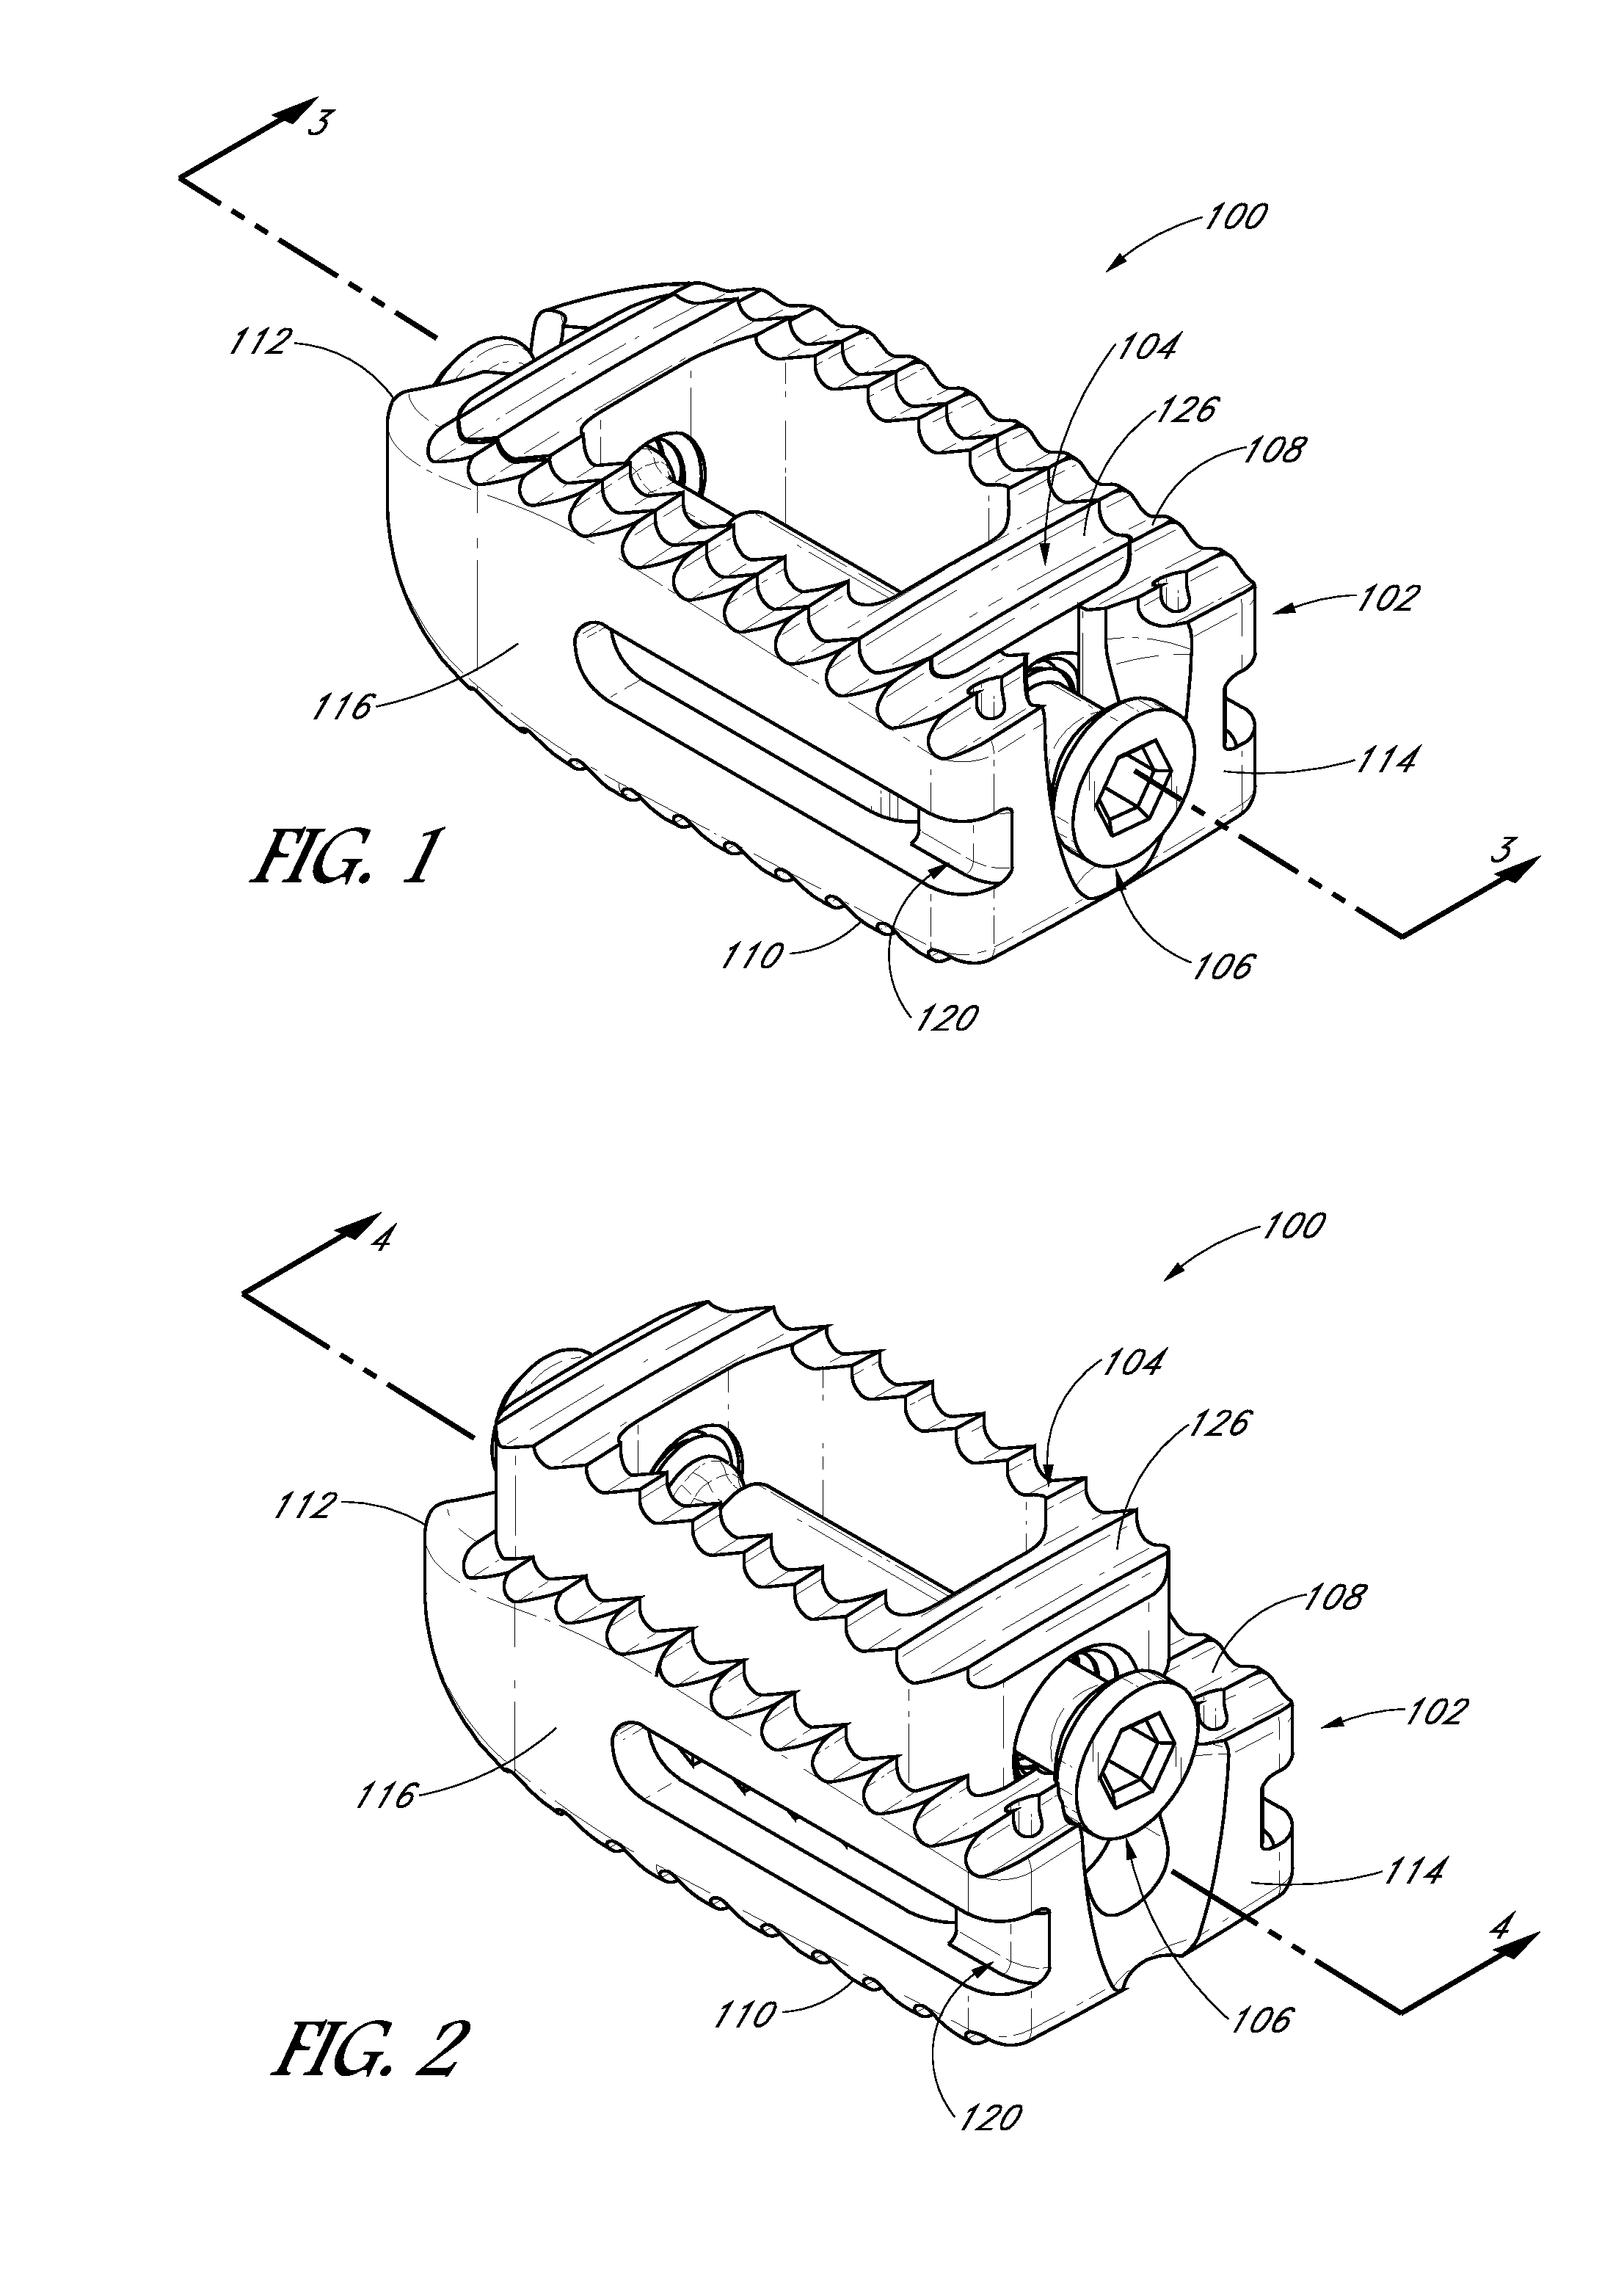 Expandable interbody device